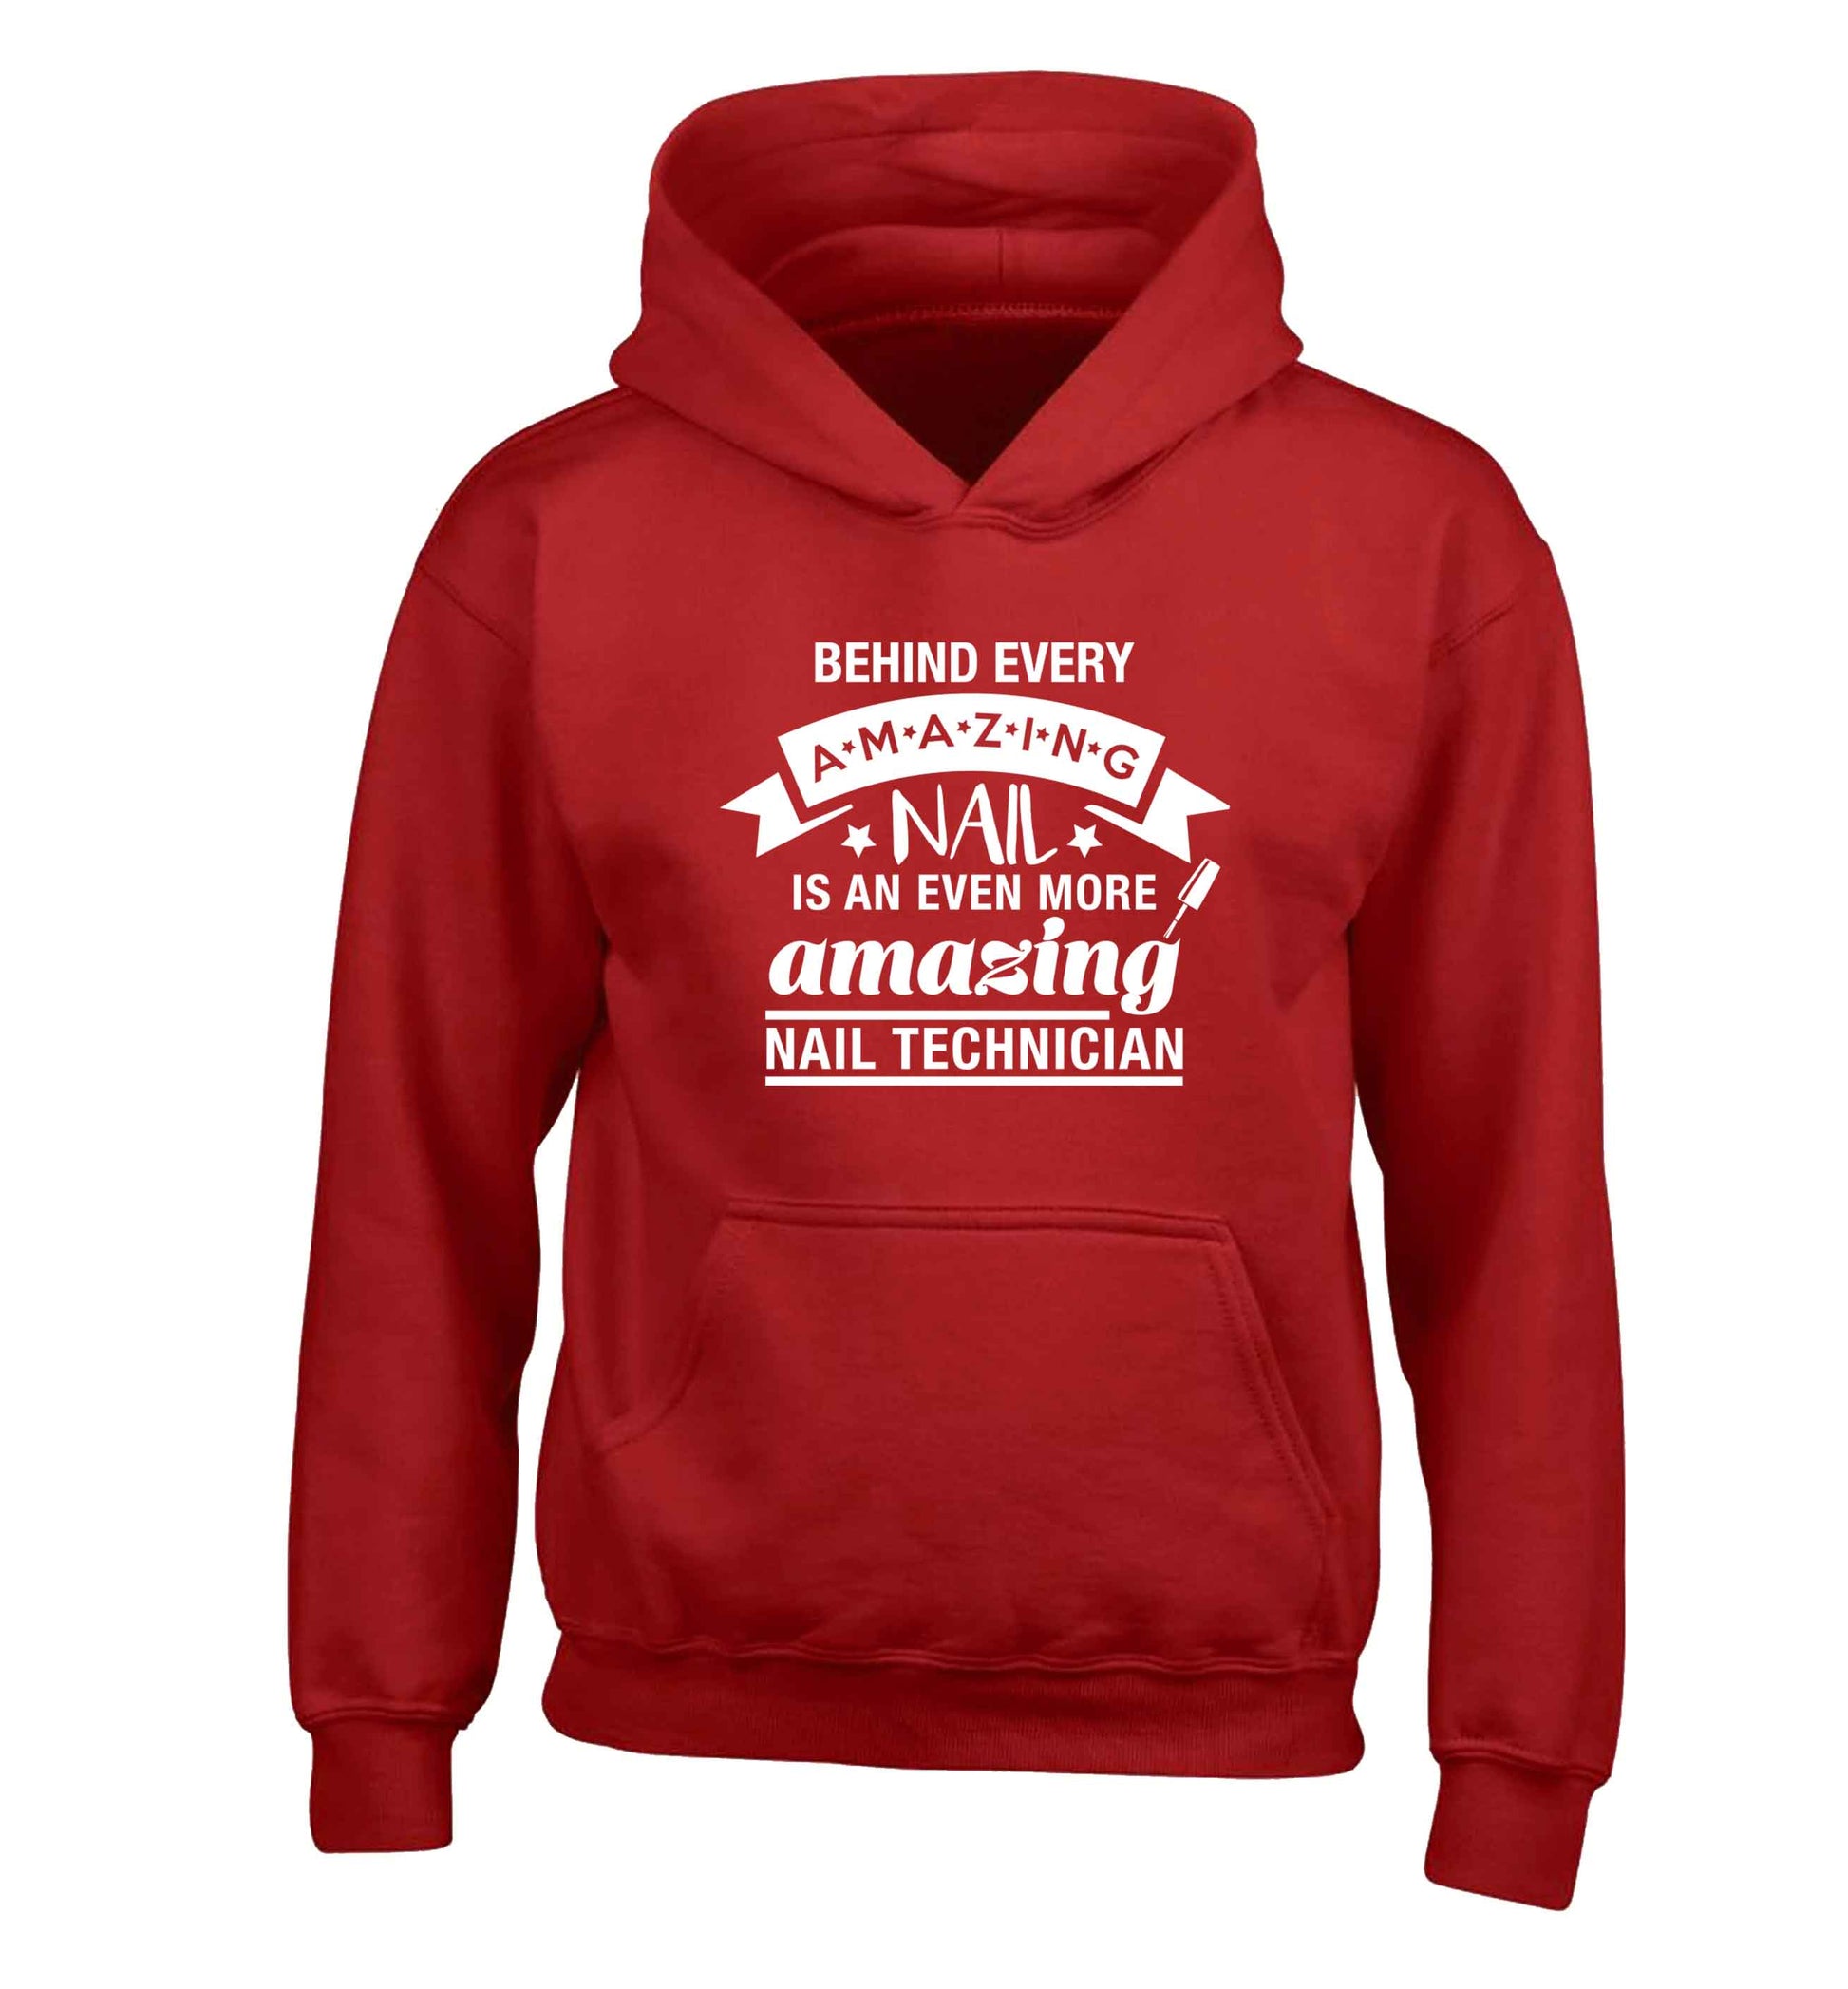 Behind every amazing nail is an even more amazing nail technician children's red hoodie 12-13 Years